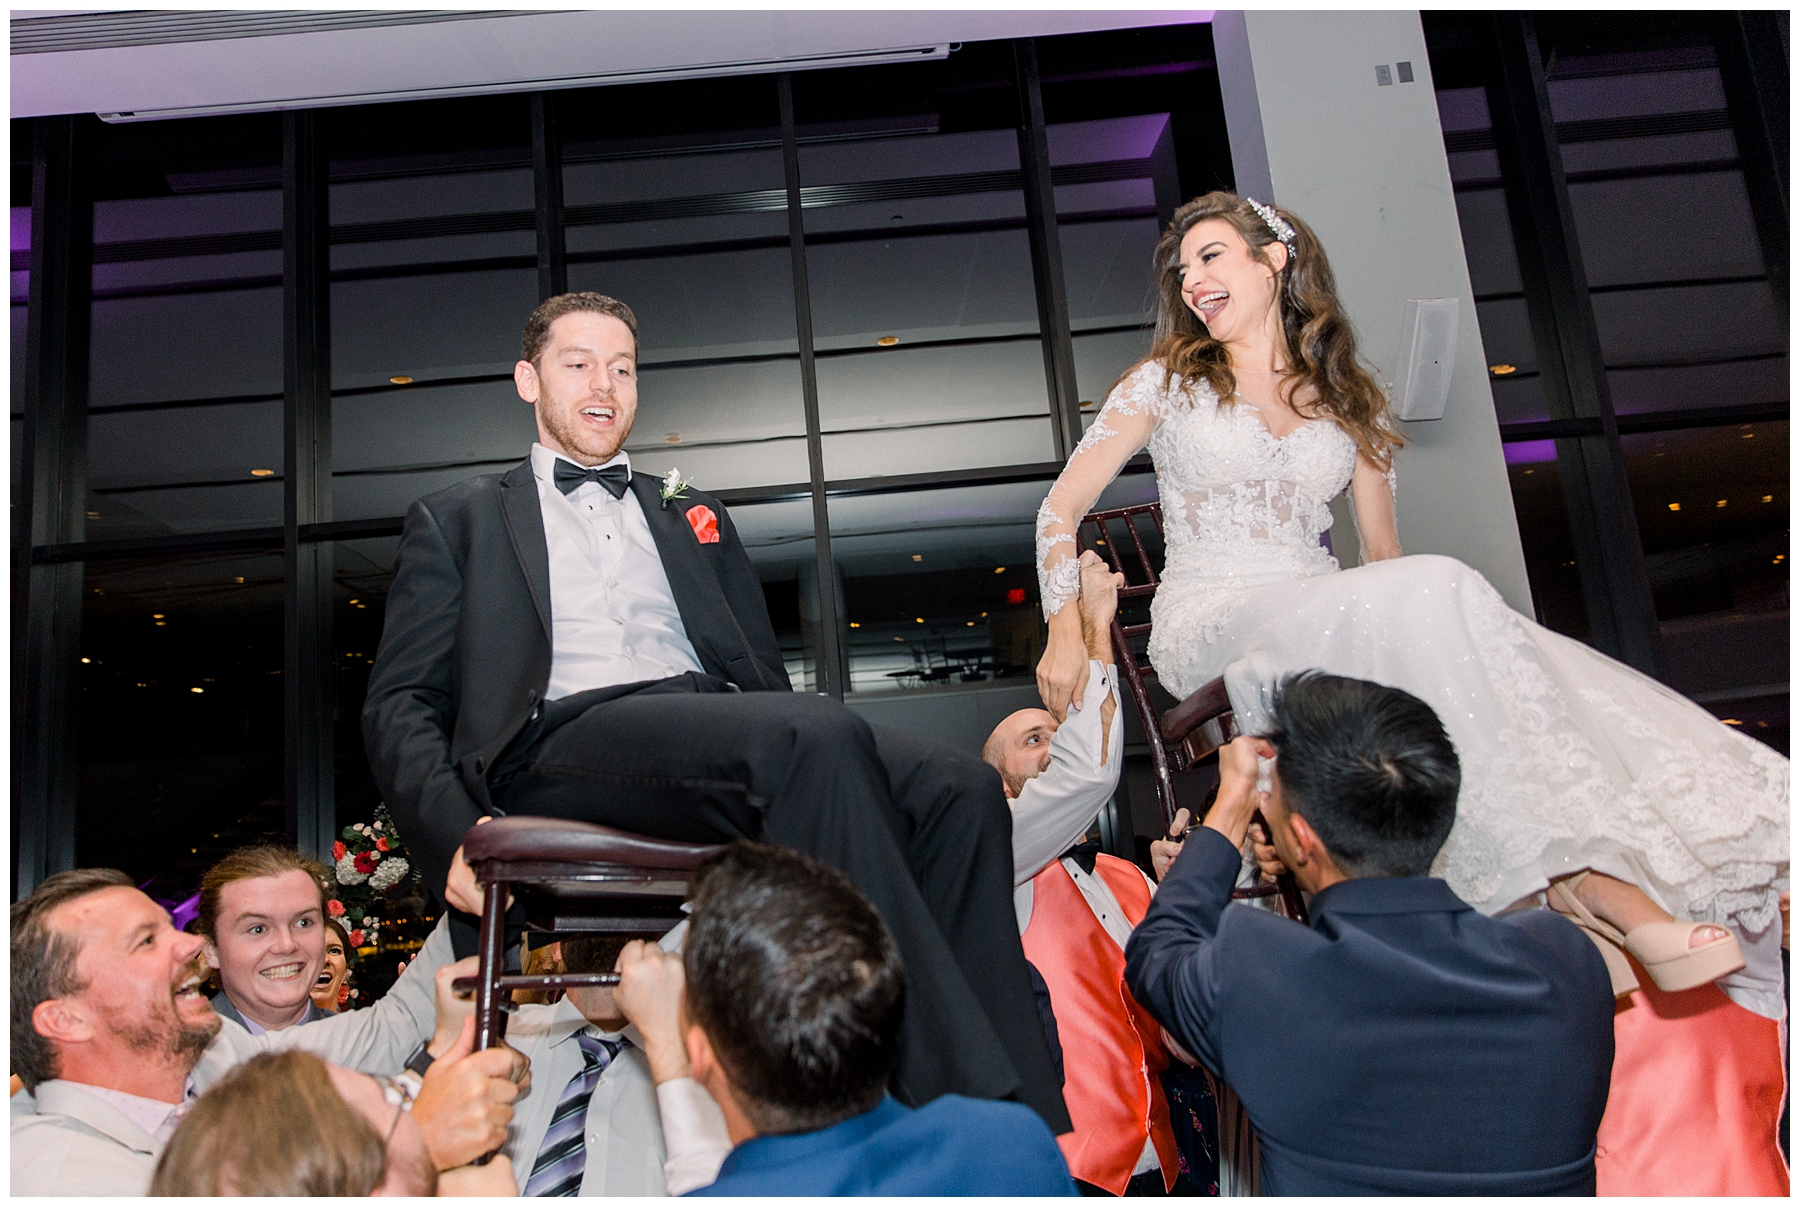 newlyweds go for a ride as guests lift them up and celebrate their wedding day